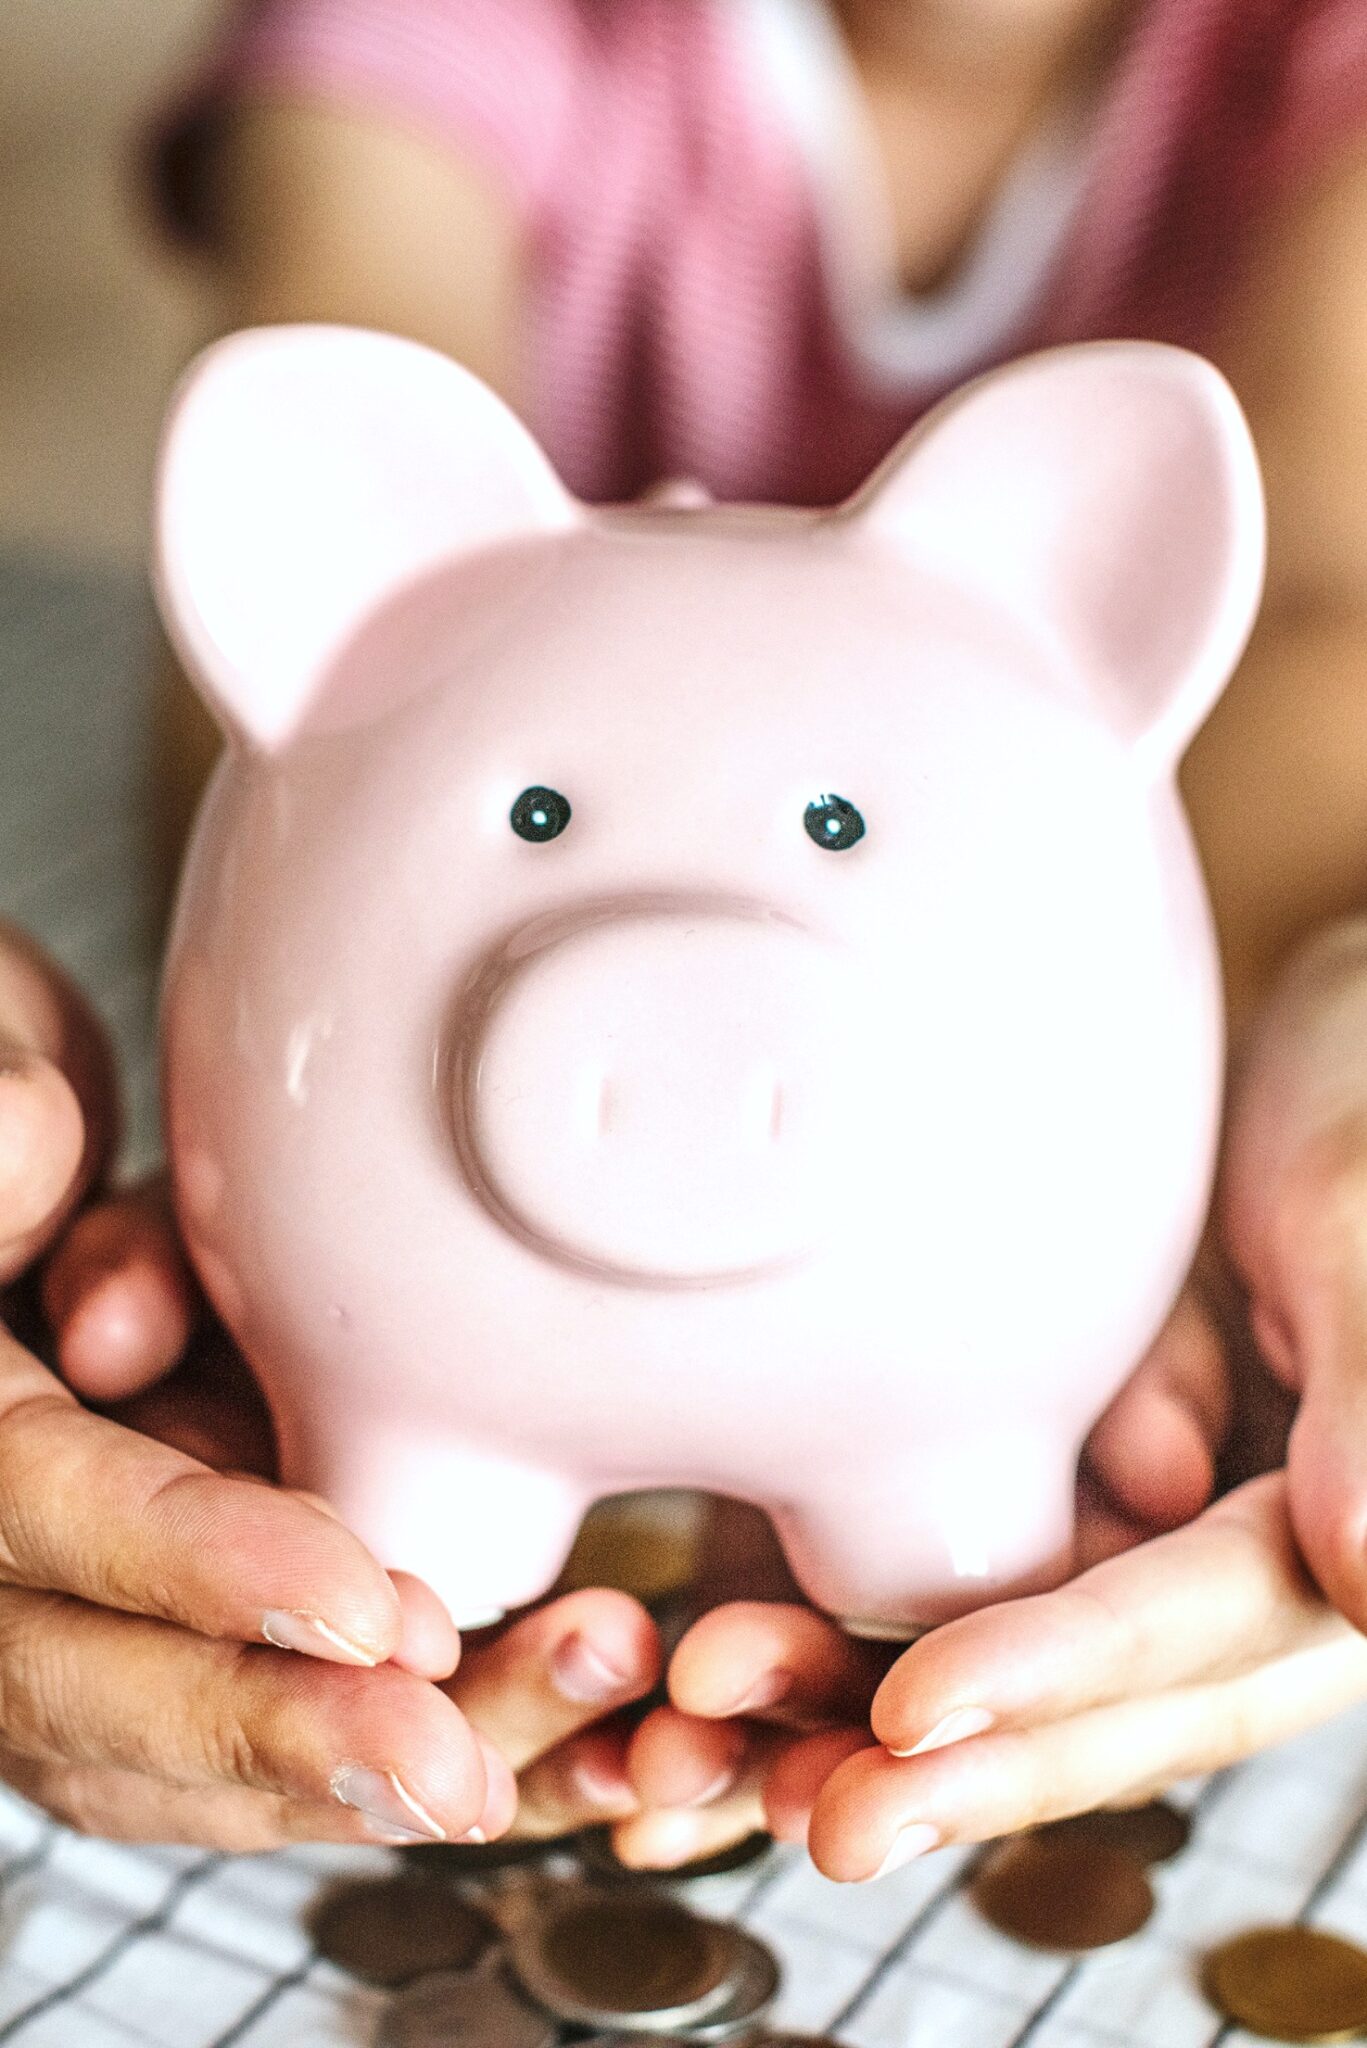 5 Ways to Give Your Savings Account a Boost